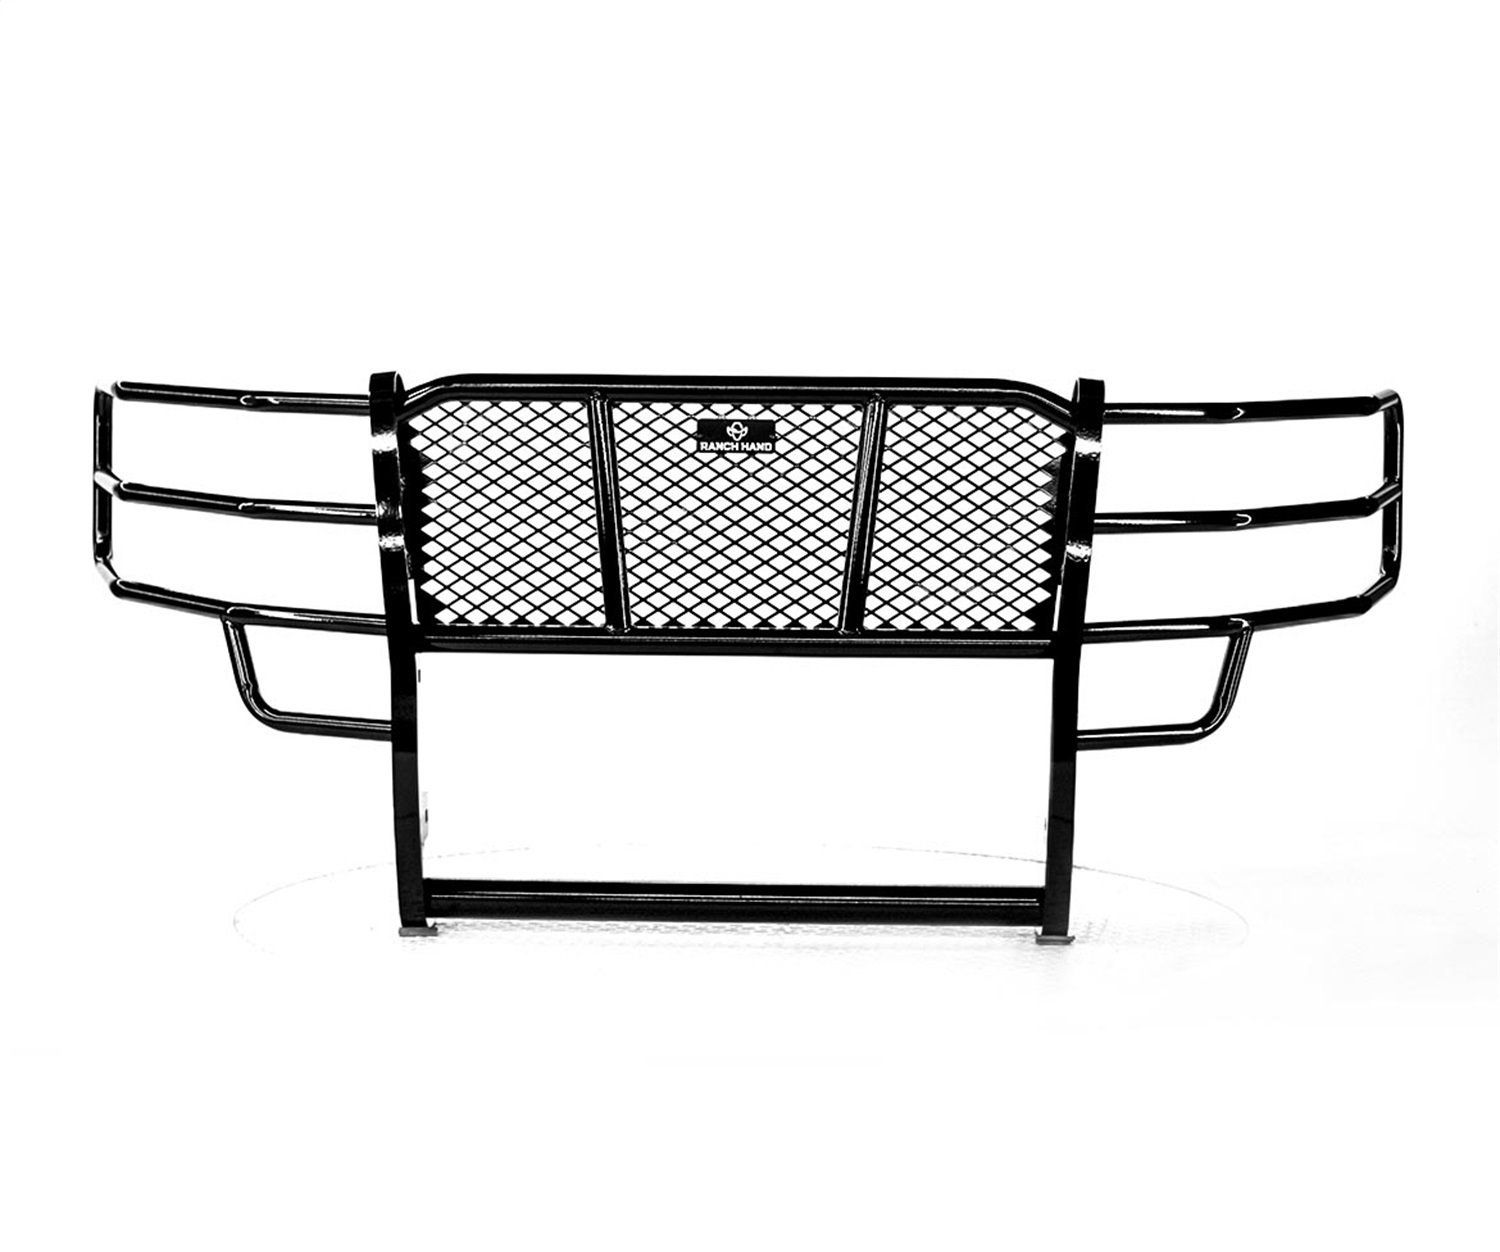 Legend Series Grille Guard For 2007-2013 Chevy 1500